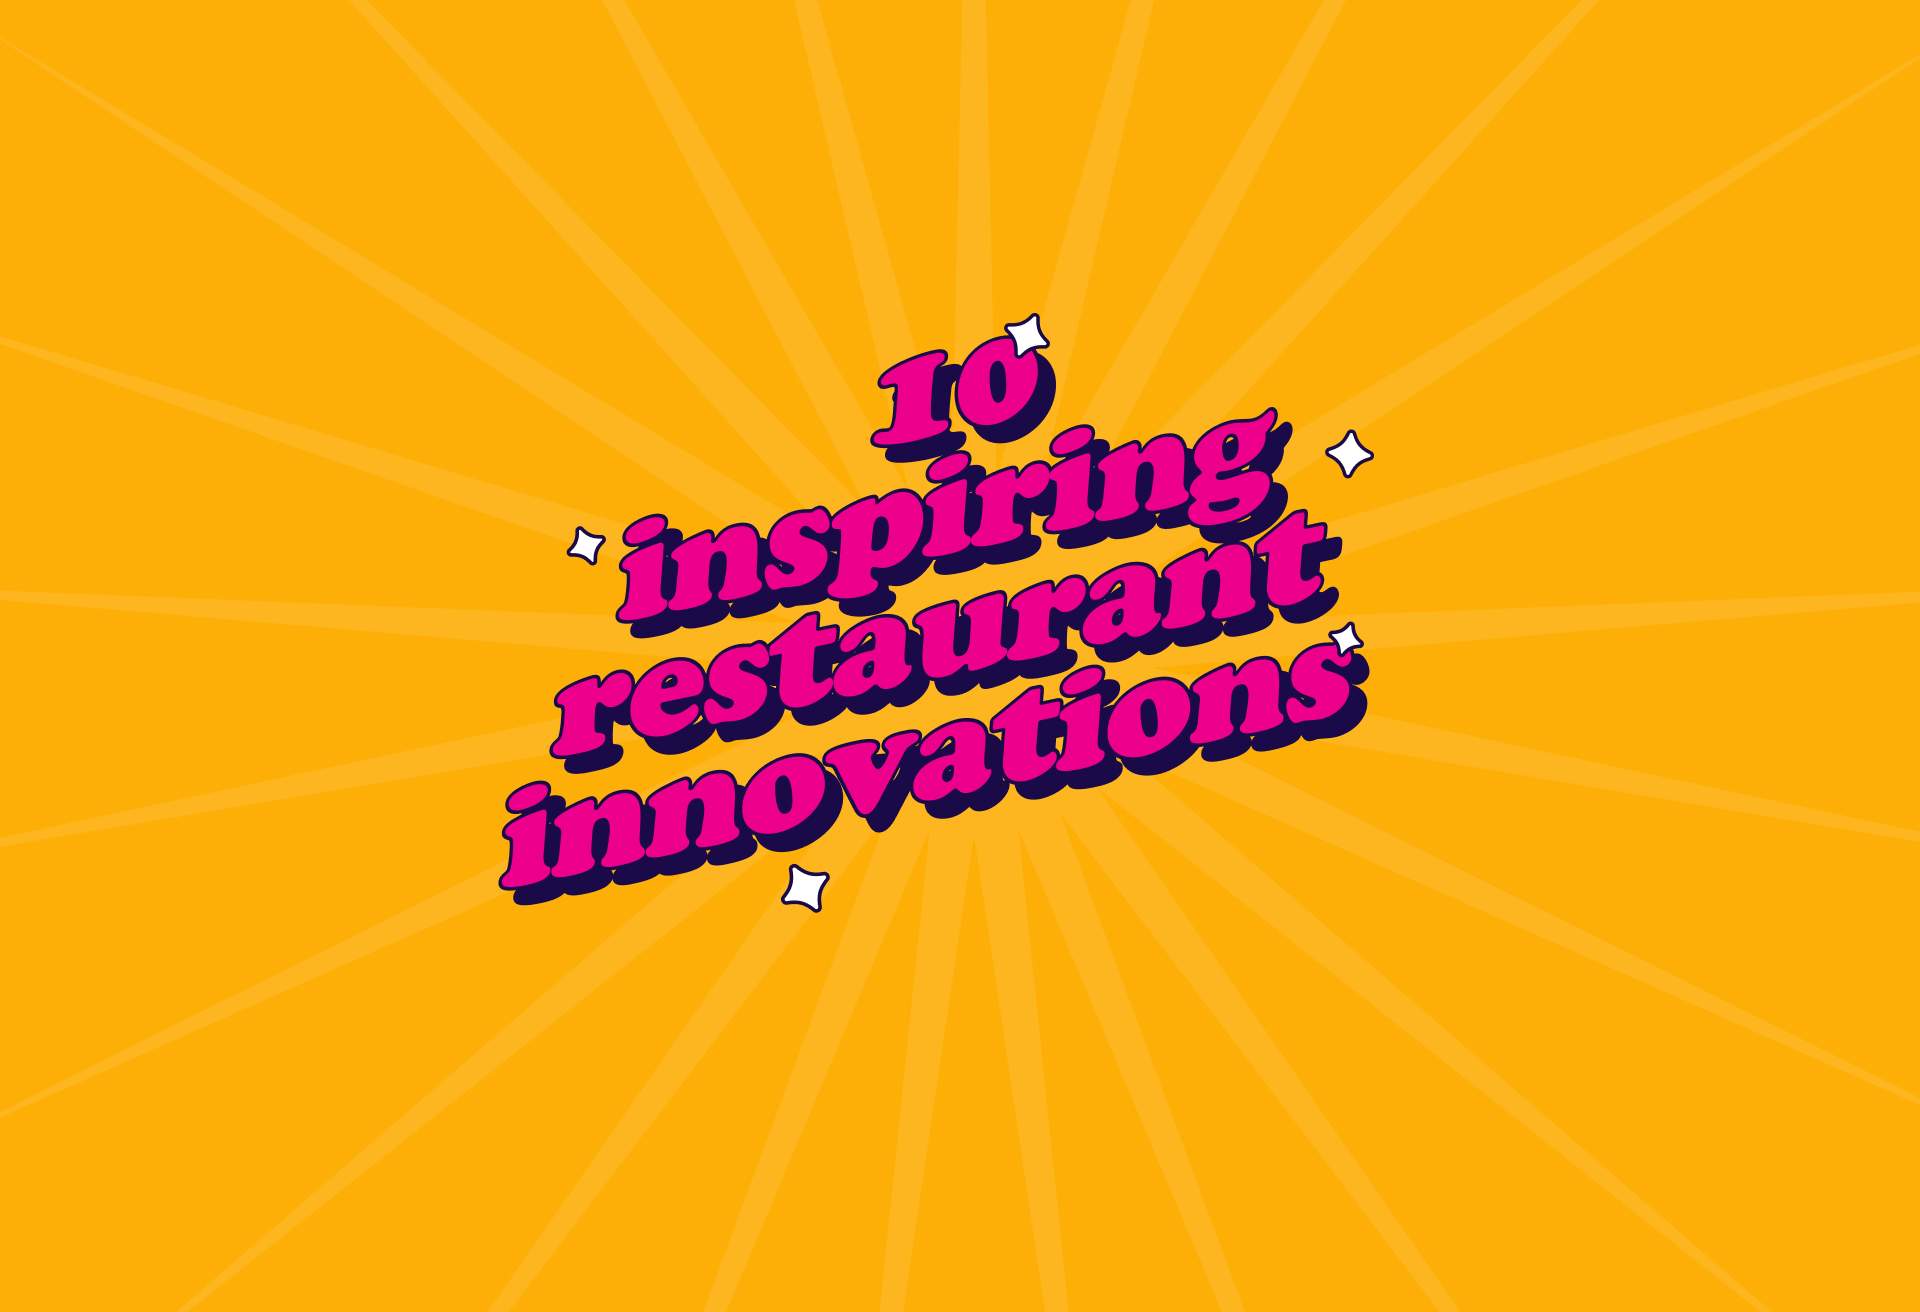 Image is an orange and pink illustration that reads “10 inspiring restaurant innovations.”